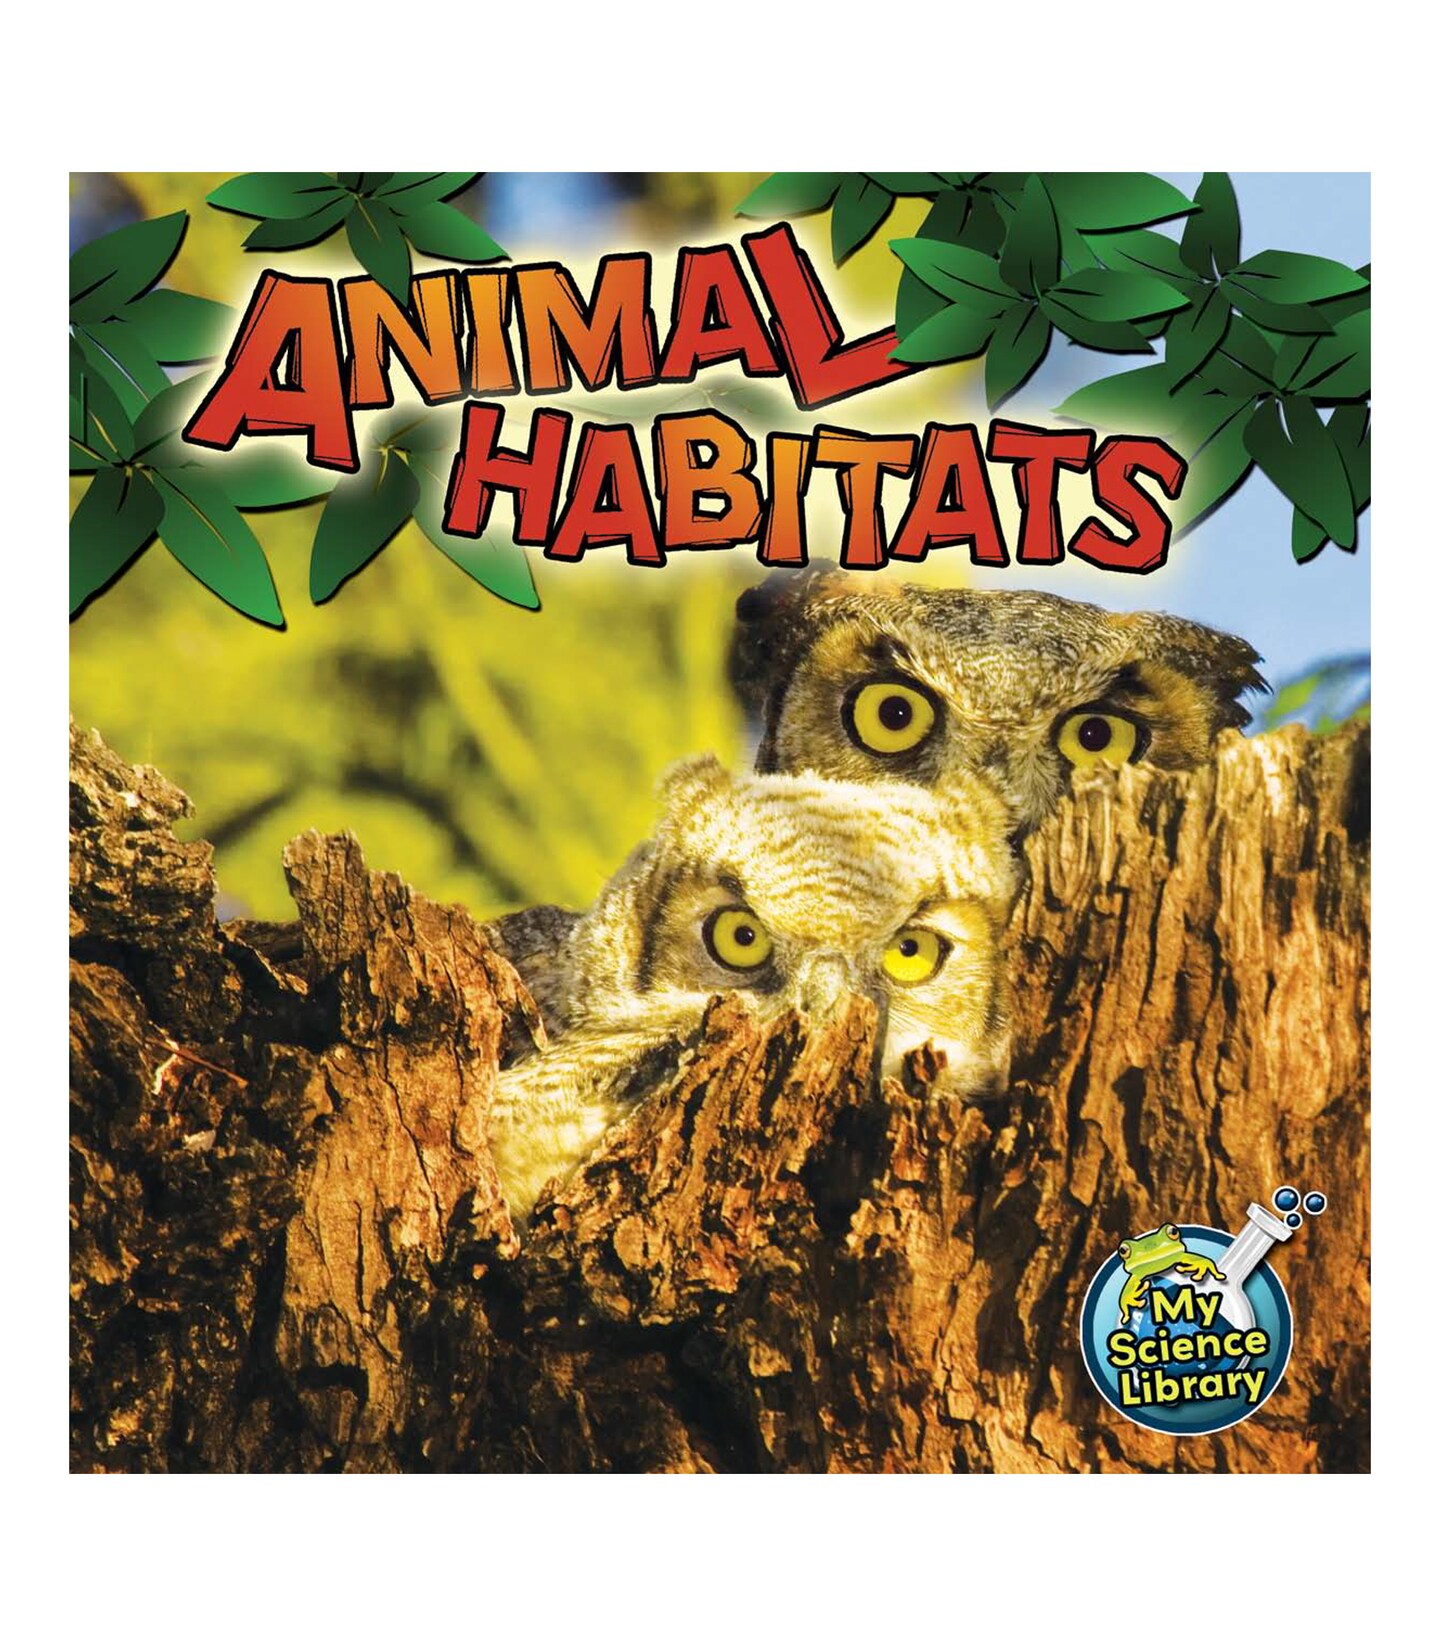 Rourke Educational Media Animal Habitats&#x2014;Children&#x2019;s Science Book About Where Animals Live, Grades 1-2 Leveled Readers, My Science Library (24 Pages) Reader